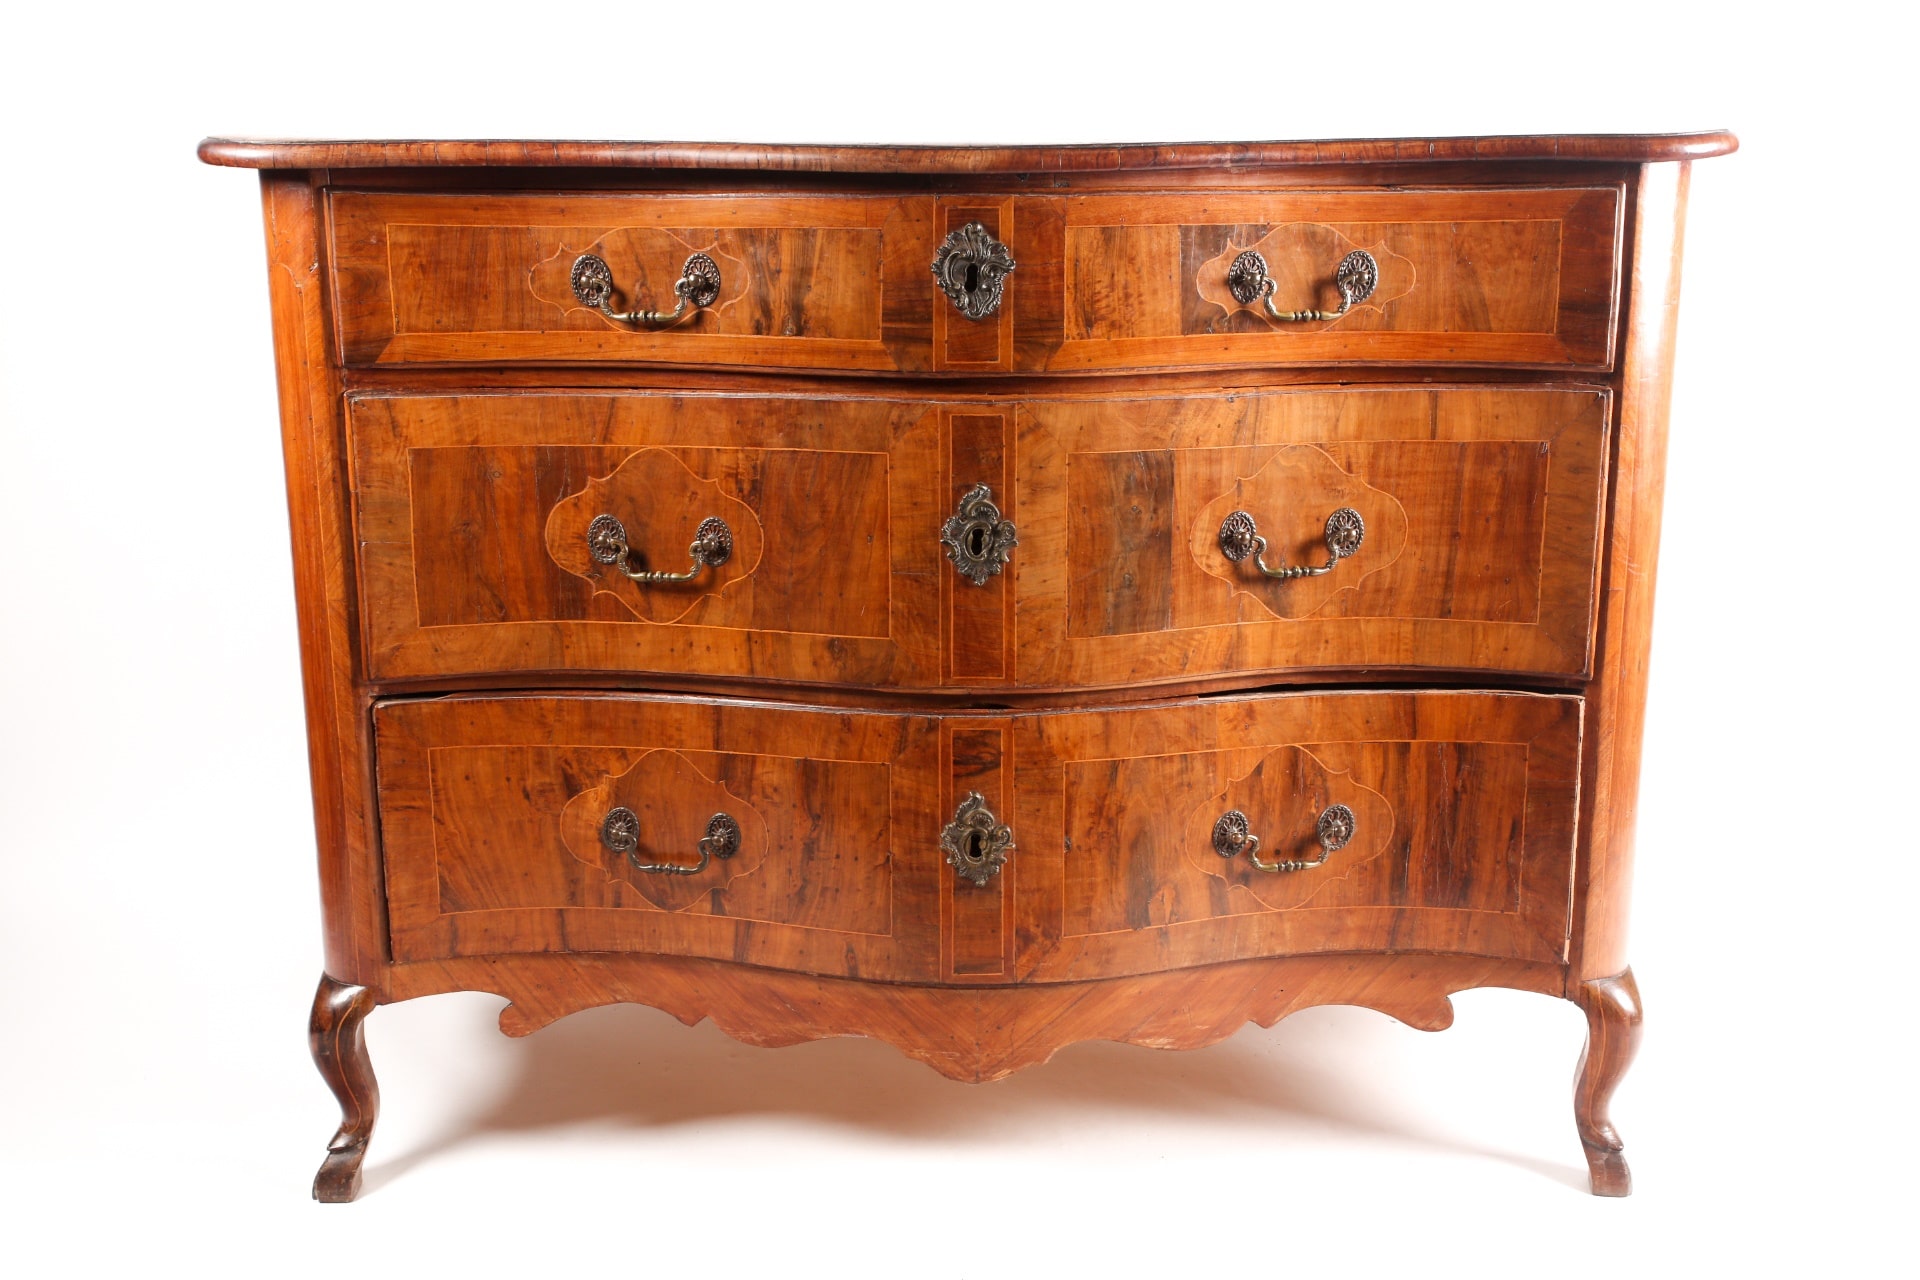 A probably Maltese 18th-century olive wood and walnut serpentine commode